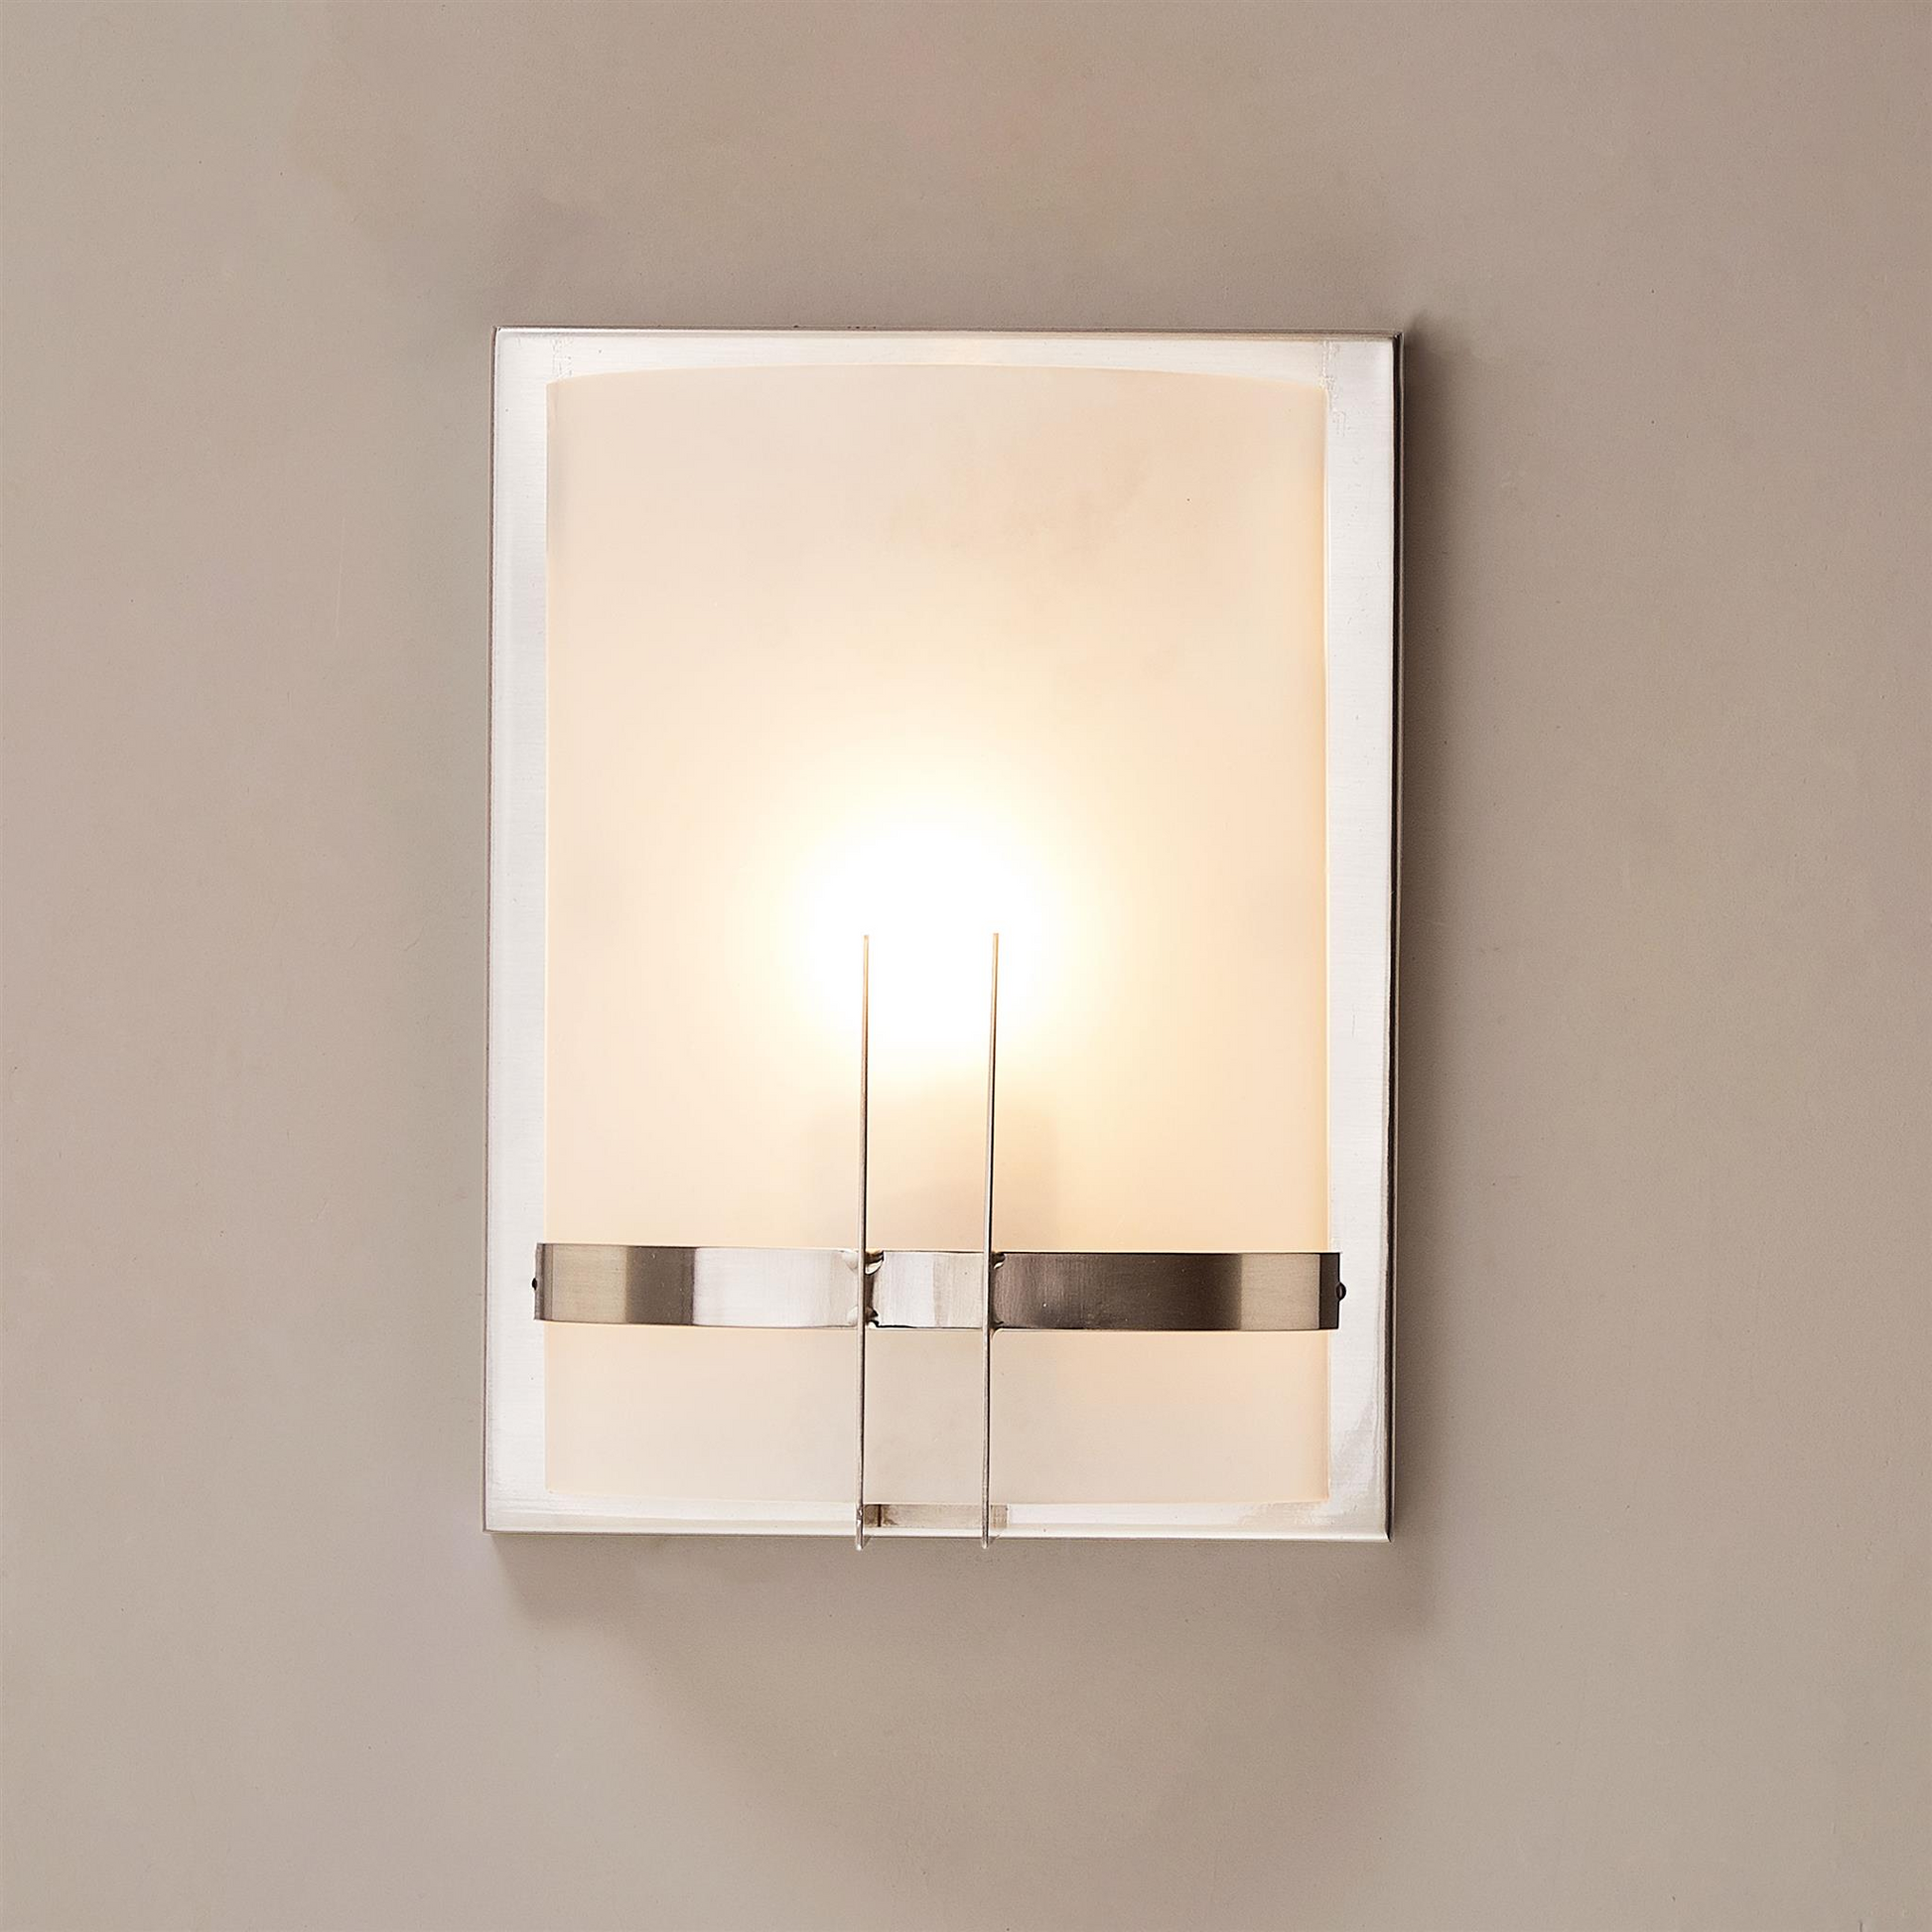 nickel-brushed-decorative-wall-sconces-lighting